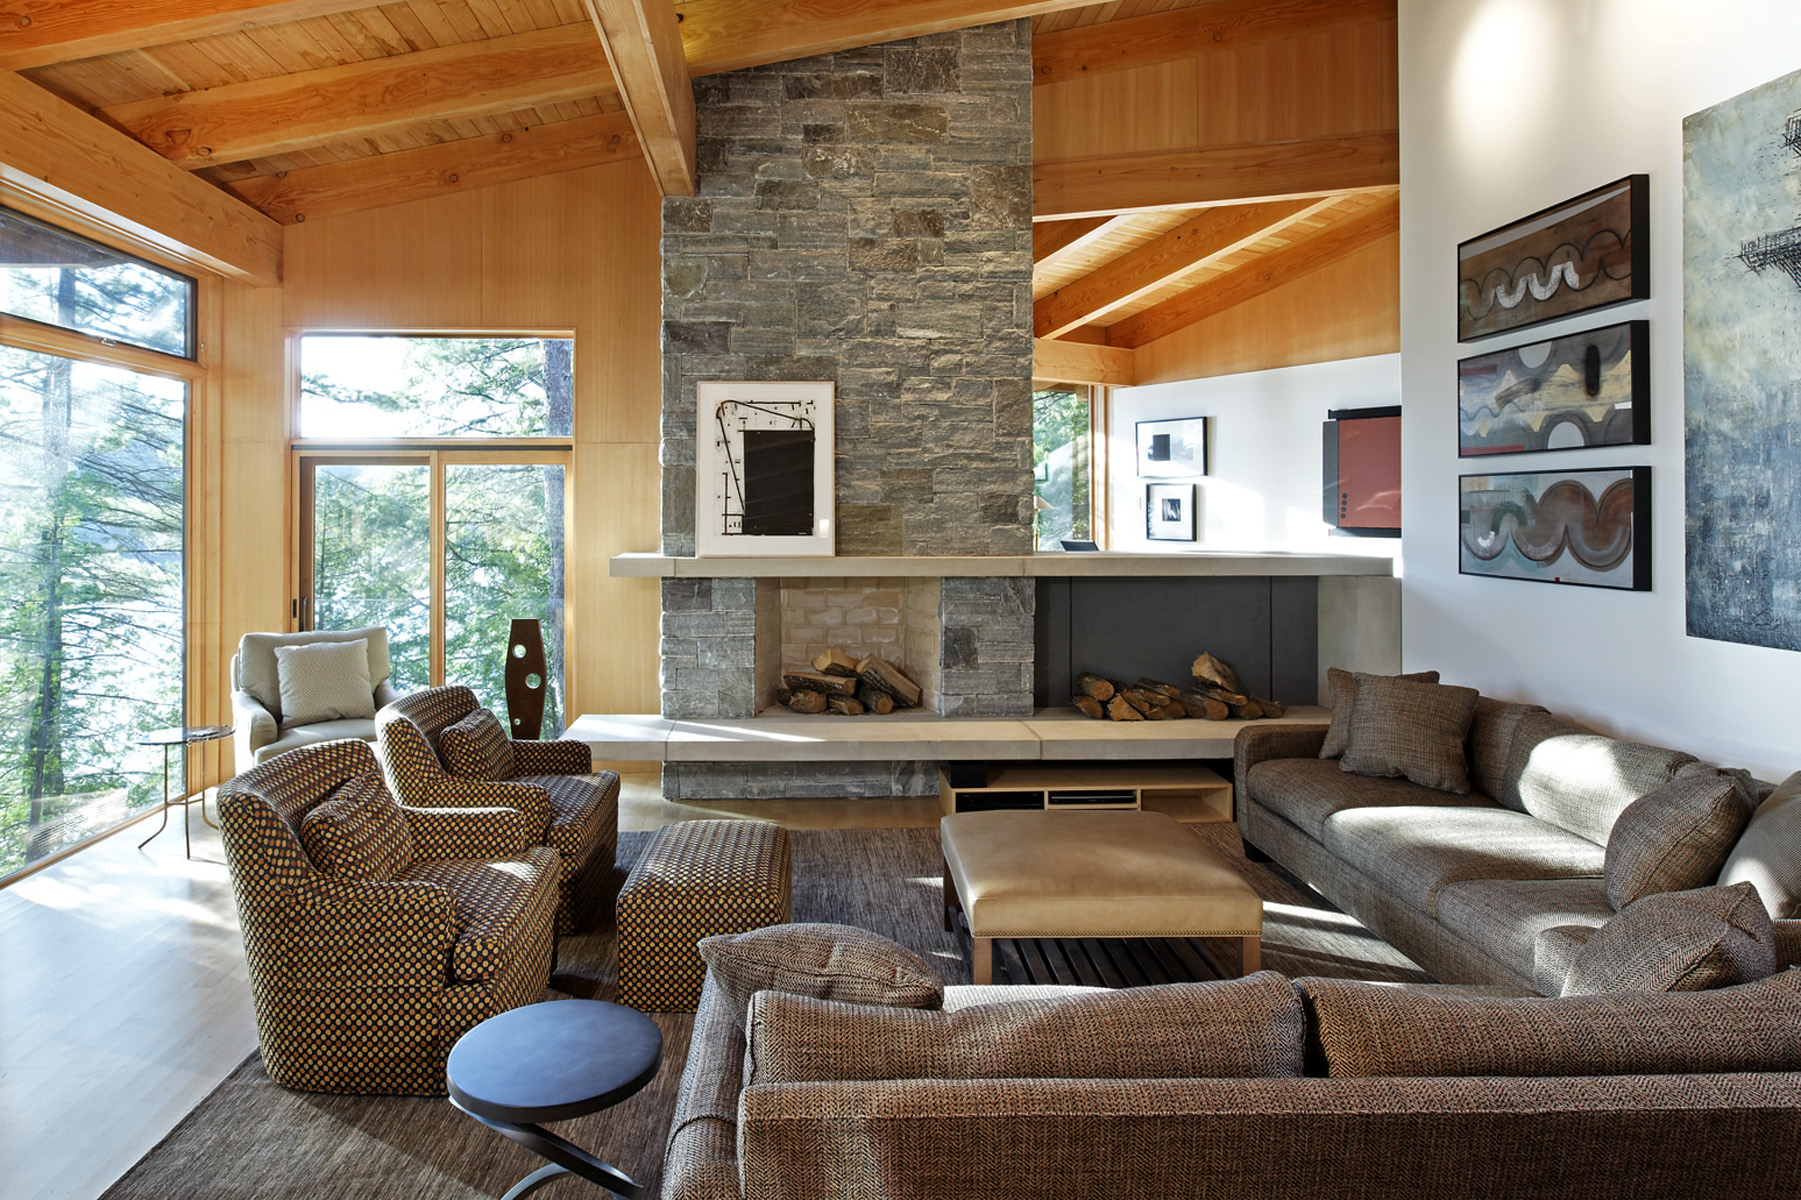 Living room with feature floor to ceiling stone fireplace and slanted wood rafter ceiling and glazed wall on left with view of trees